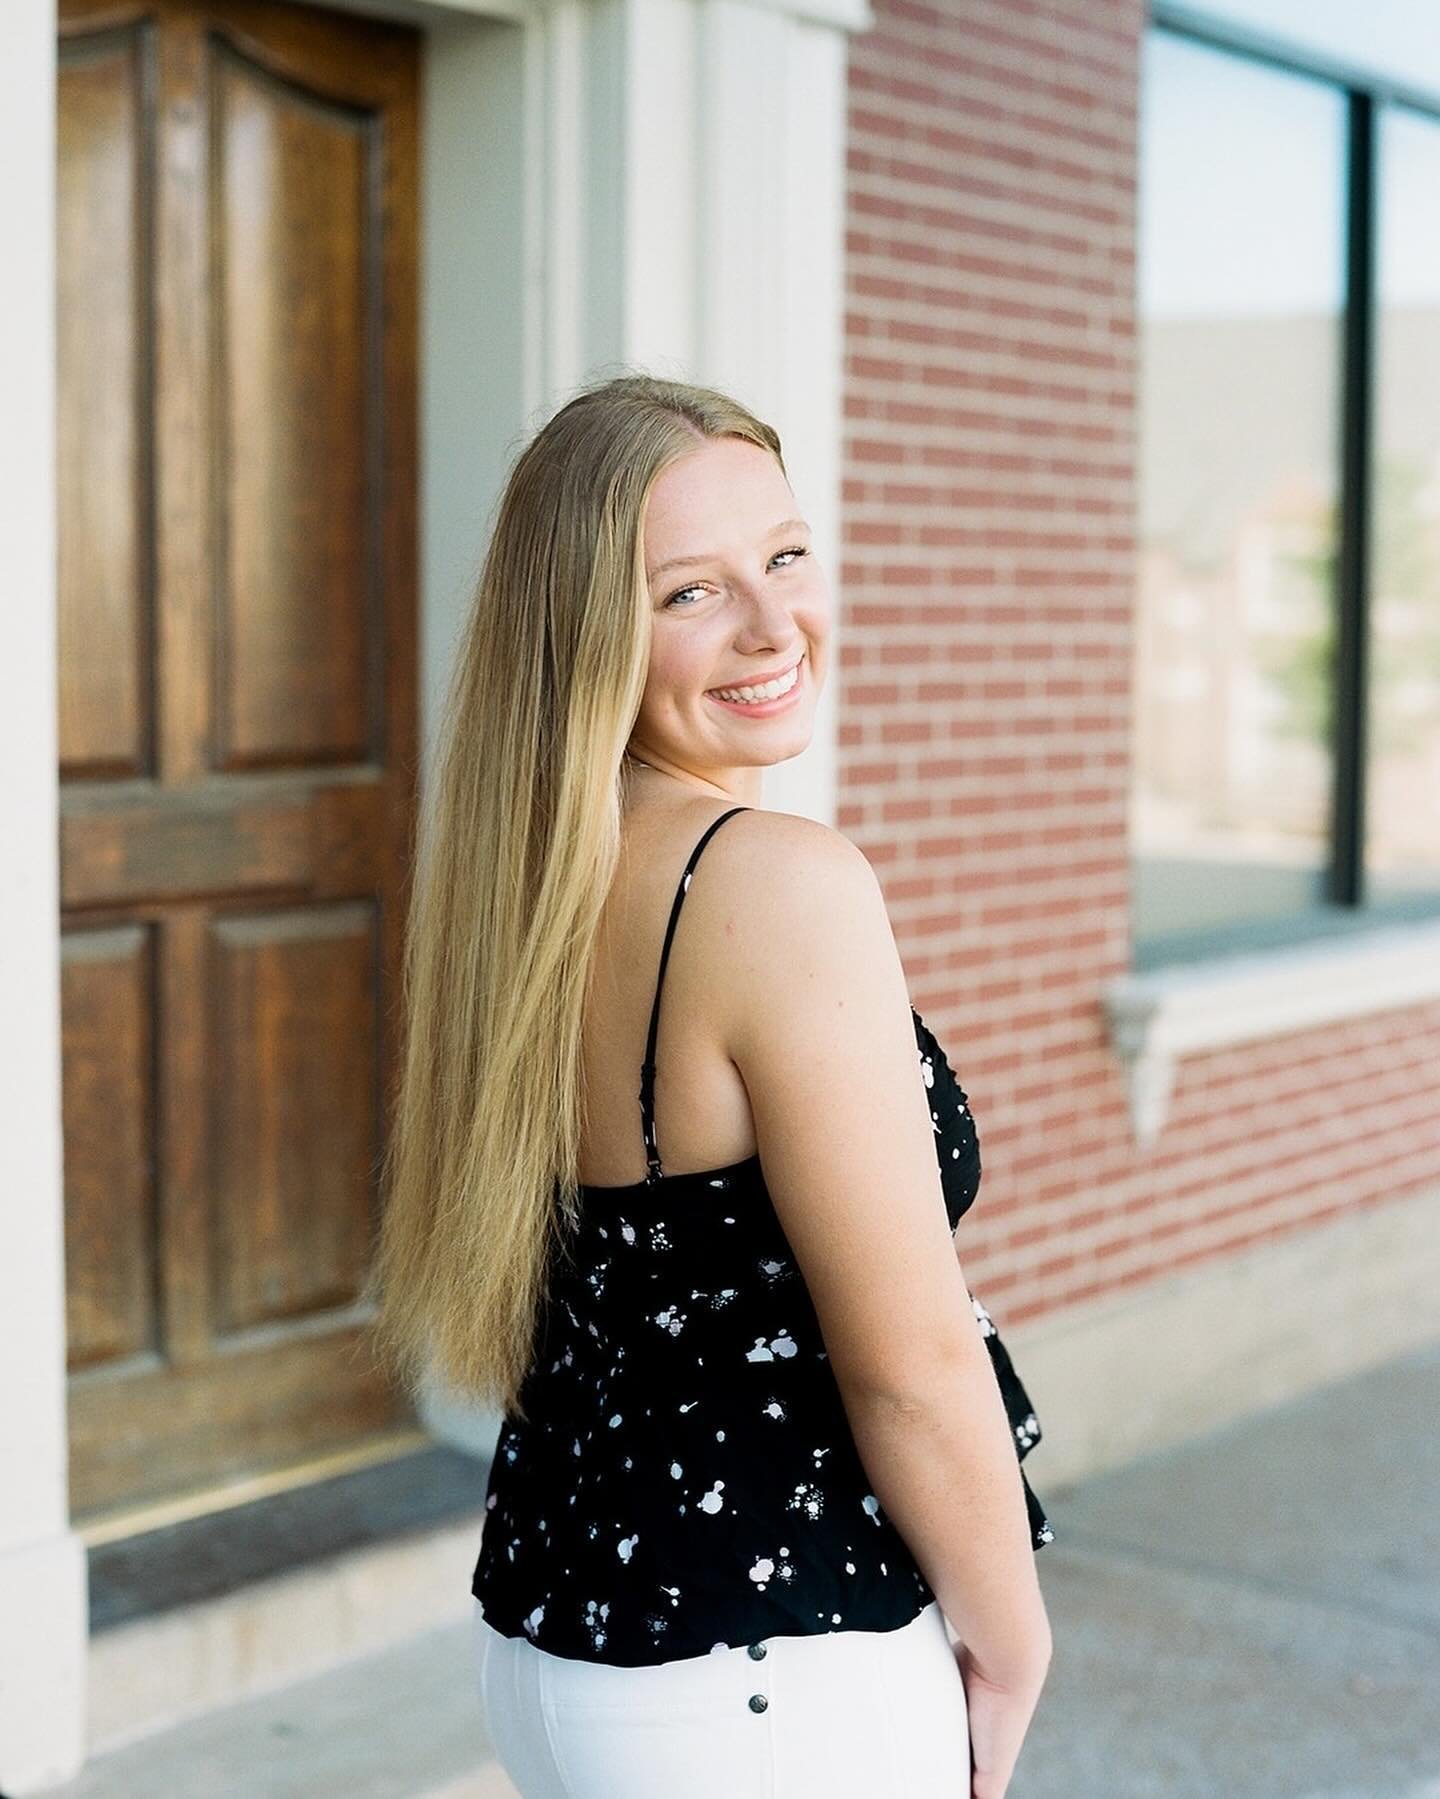 Wondering how to decide where to have your senior session? Choosing a location can be tough for many of my clients, but I&rsquo;m here to help you make those decisions.☺️
⠀⠀⠀⠀⠀⠀⠀⠀⠀
Consider these few things:
⠀⠀⠀⠀⠀⠀⠀⠀⠀
Season: The timing of the season